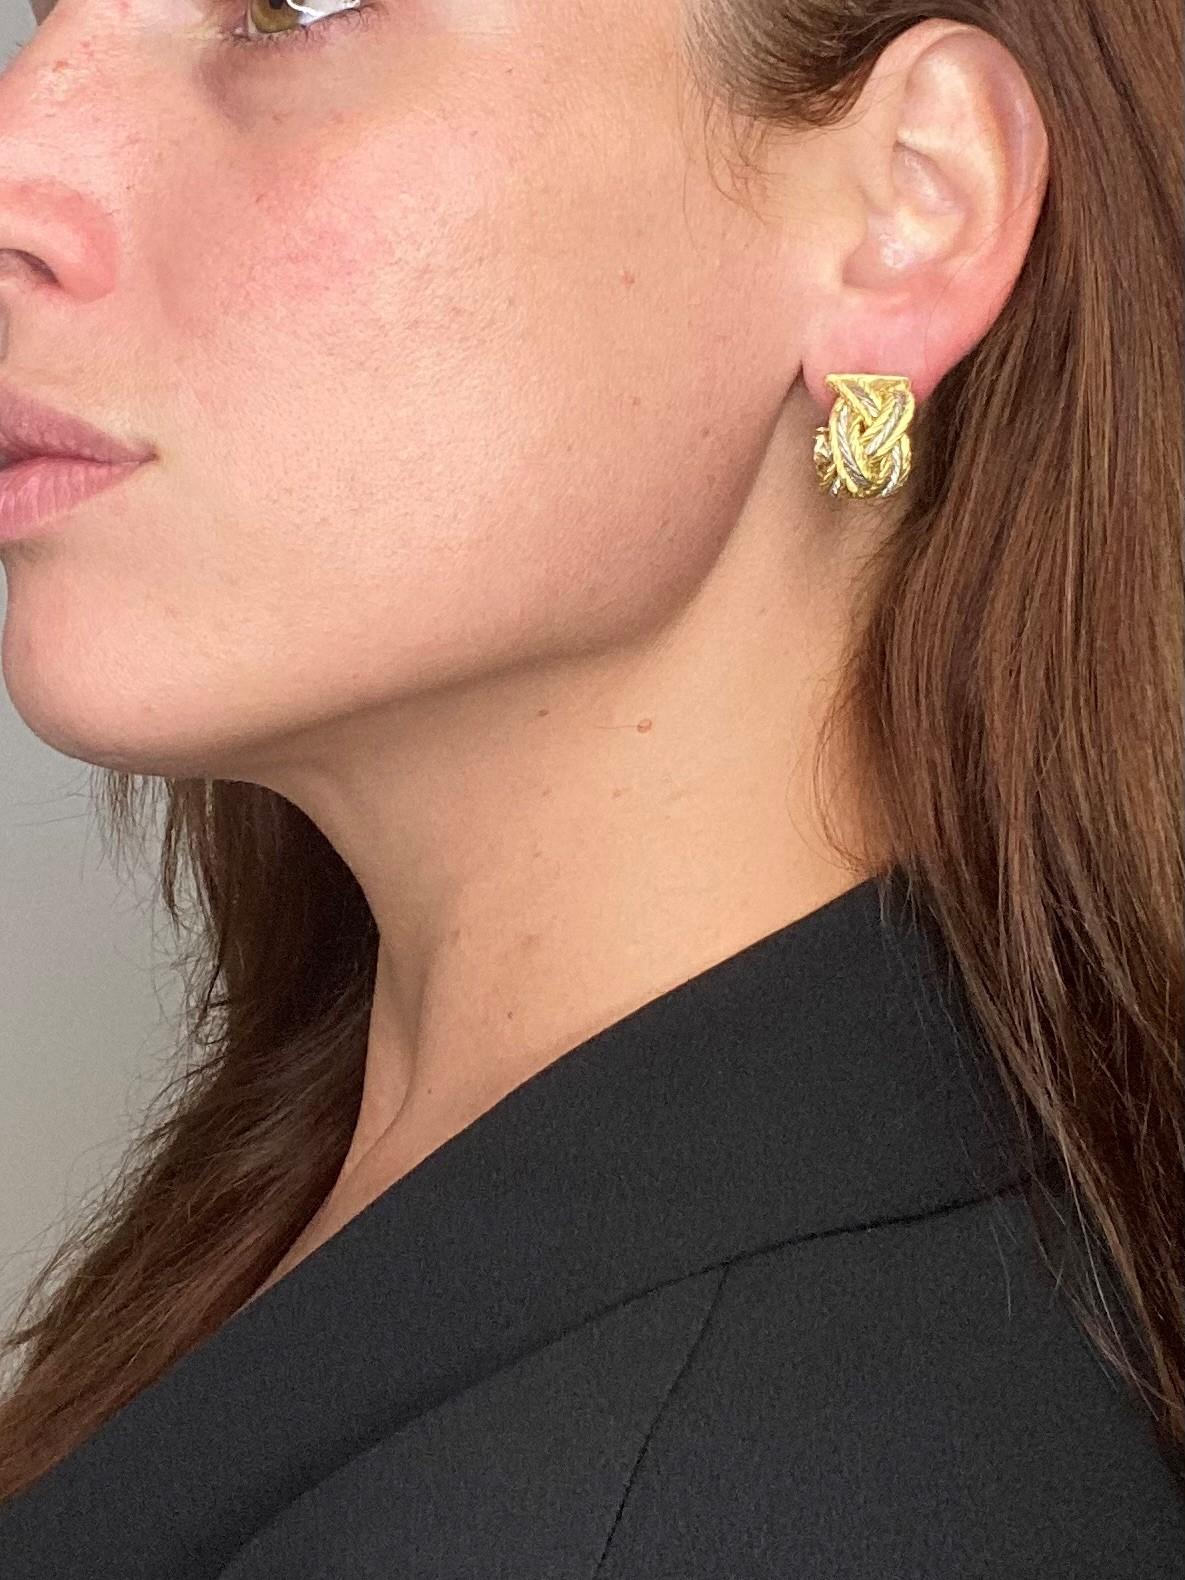 Large pair of hoops earrings designed by Gianmaria Buccellati.

A classic round pair, crafted with impeccable details in solid 18 karats of textured yellow and white gold. All the surface is finished with the characteristic and iconic Buccellati's